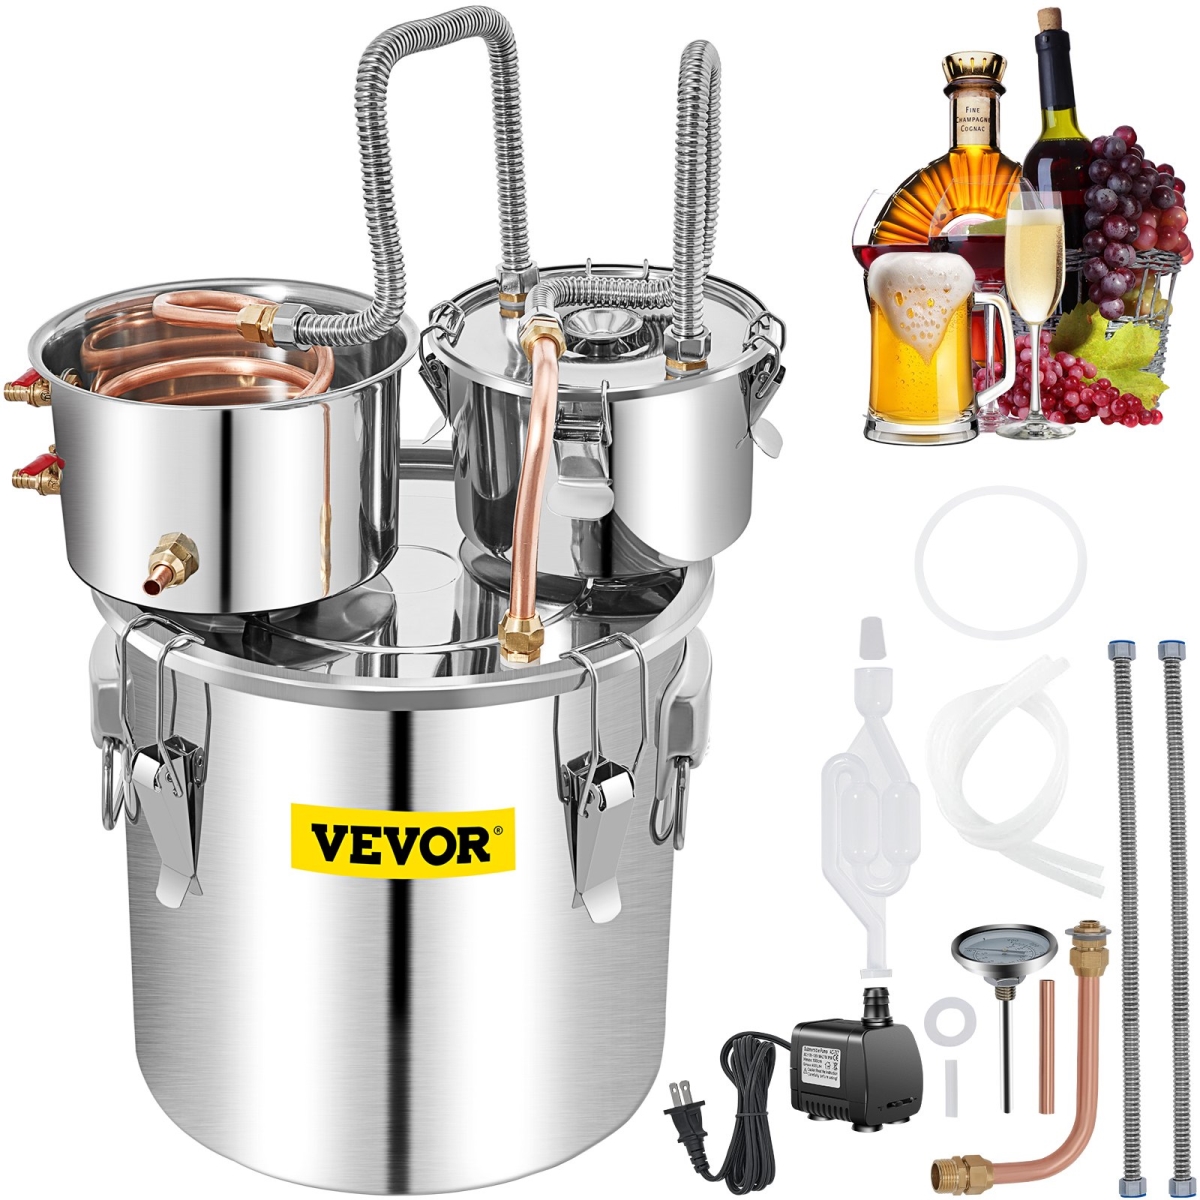 Picture of Vevor ZLQSLNTDBM50LUIFKV1 Alcohol Still&#44; 13.2 gal & 50L Stainless Steel Water Alcohol Distiller Copper Tube Home Brewing Kit Build-in Thermometer for DIY Whisky Wine Brandy - Silver